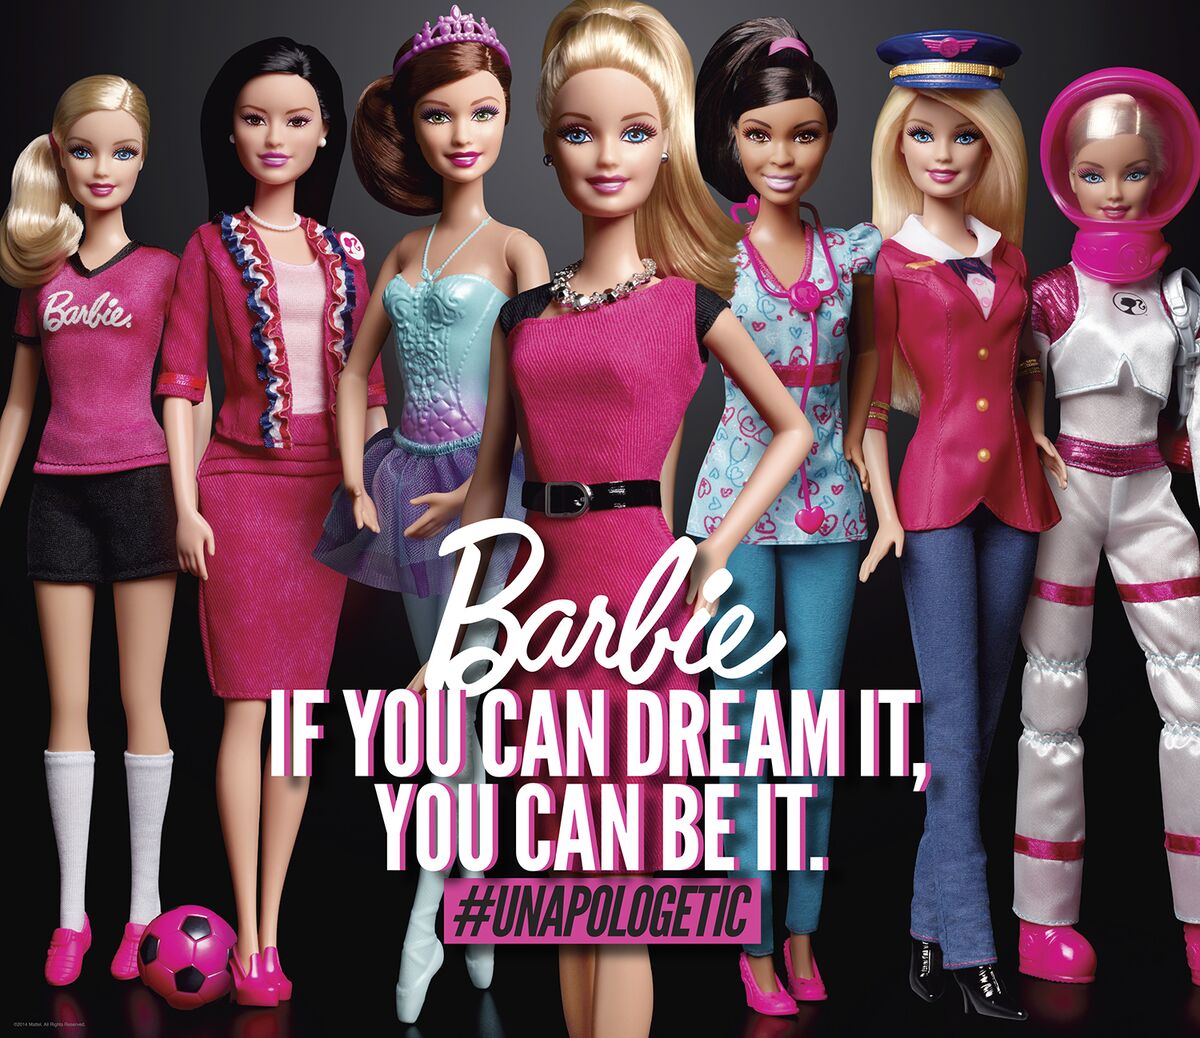 Meet the New Wave of More 'Diverse' Barbie Dolls, Smart News